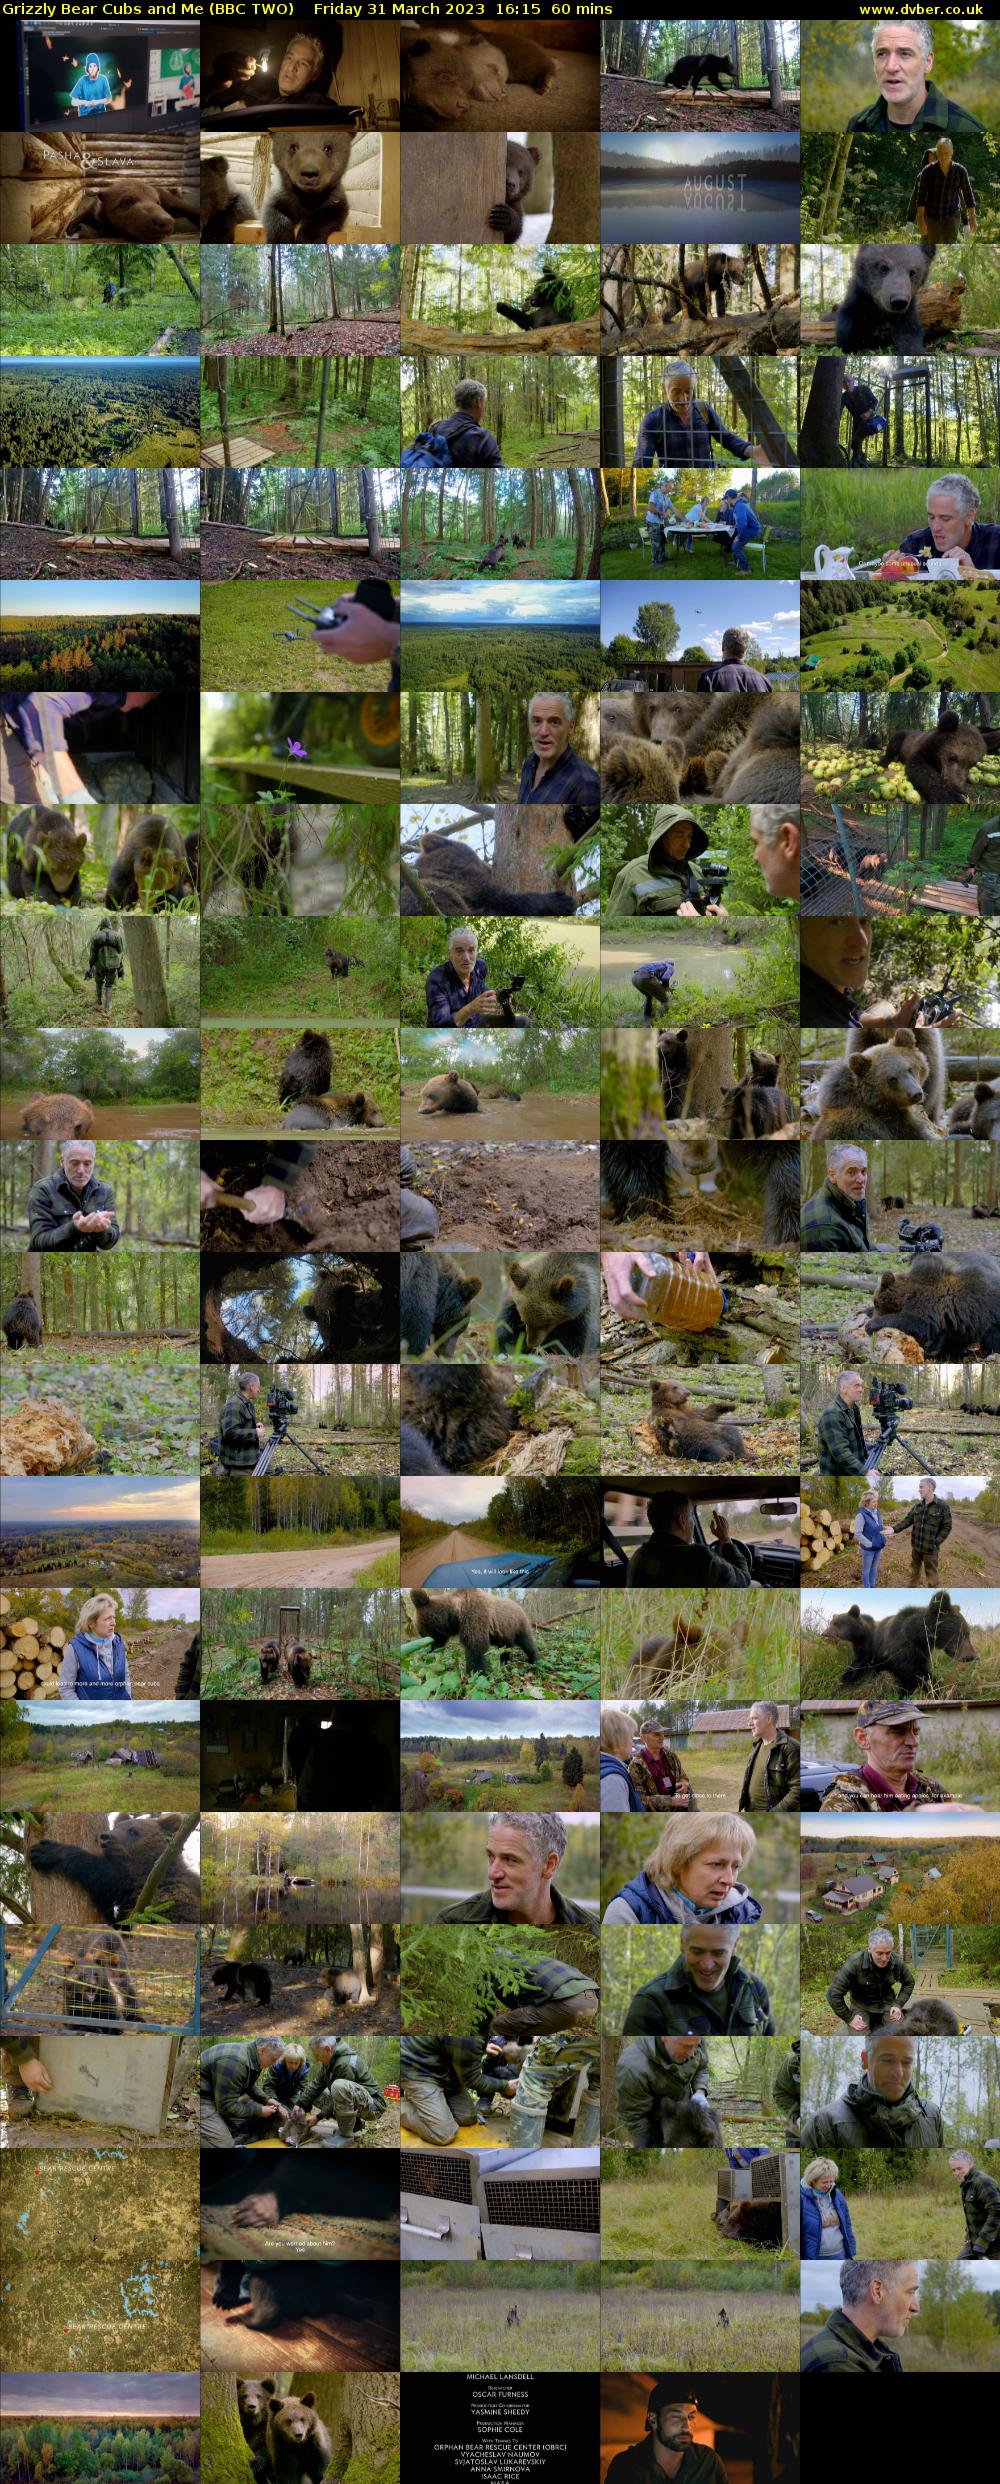 Grizzly Bear Cubs and Me (BBC TWO) Friday 31 March 2023 16:15 - 17:15